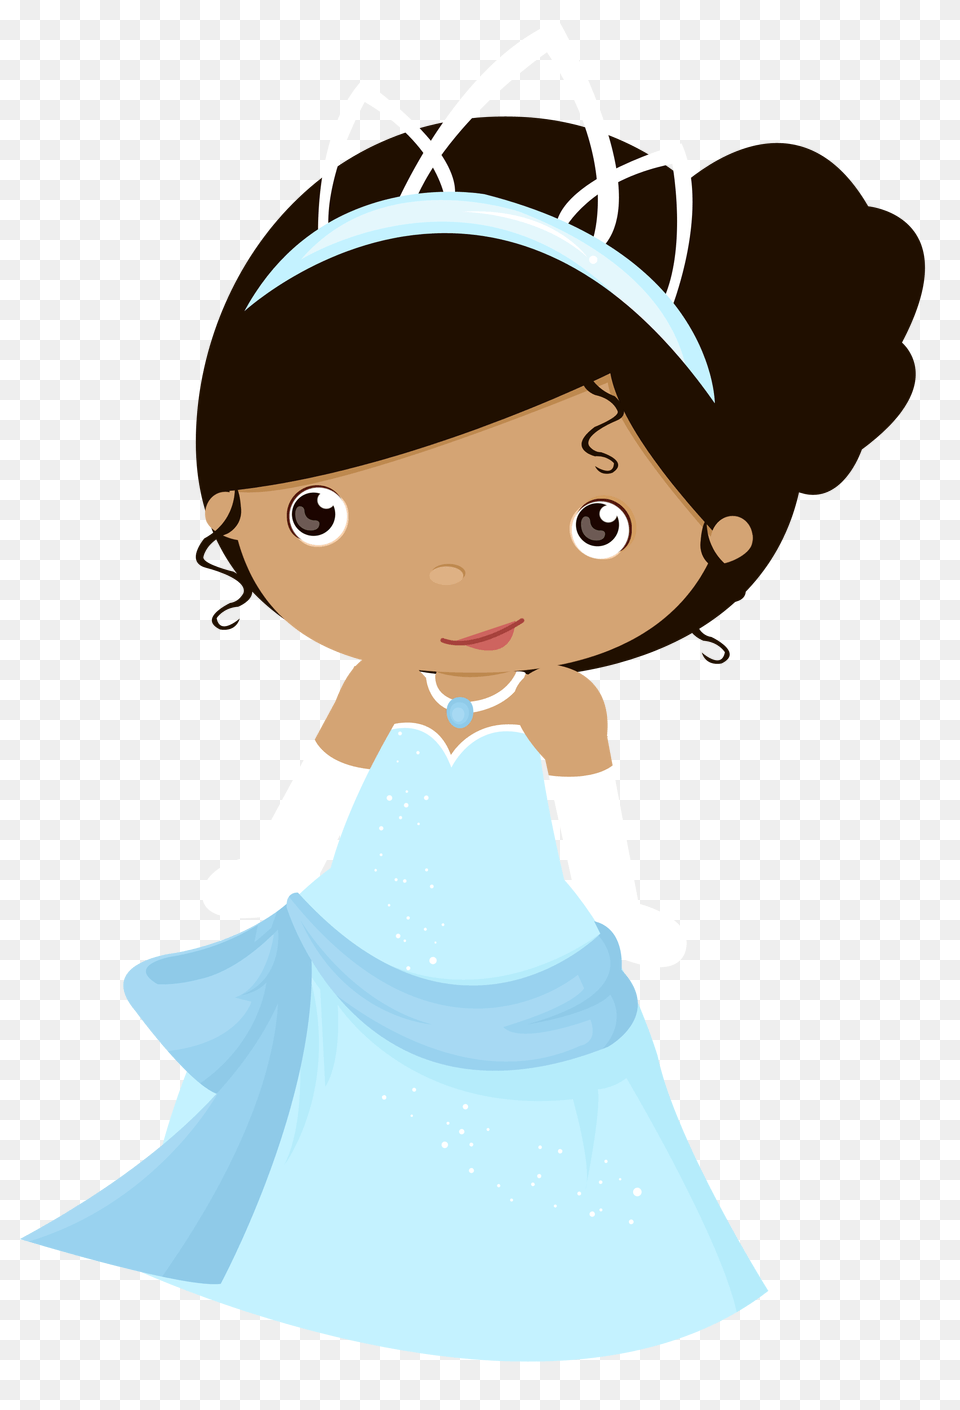 Clipart Princess Princess Tiana, Accessories, Jewelry, Clothing, Dress Png Image